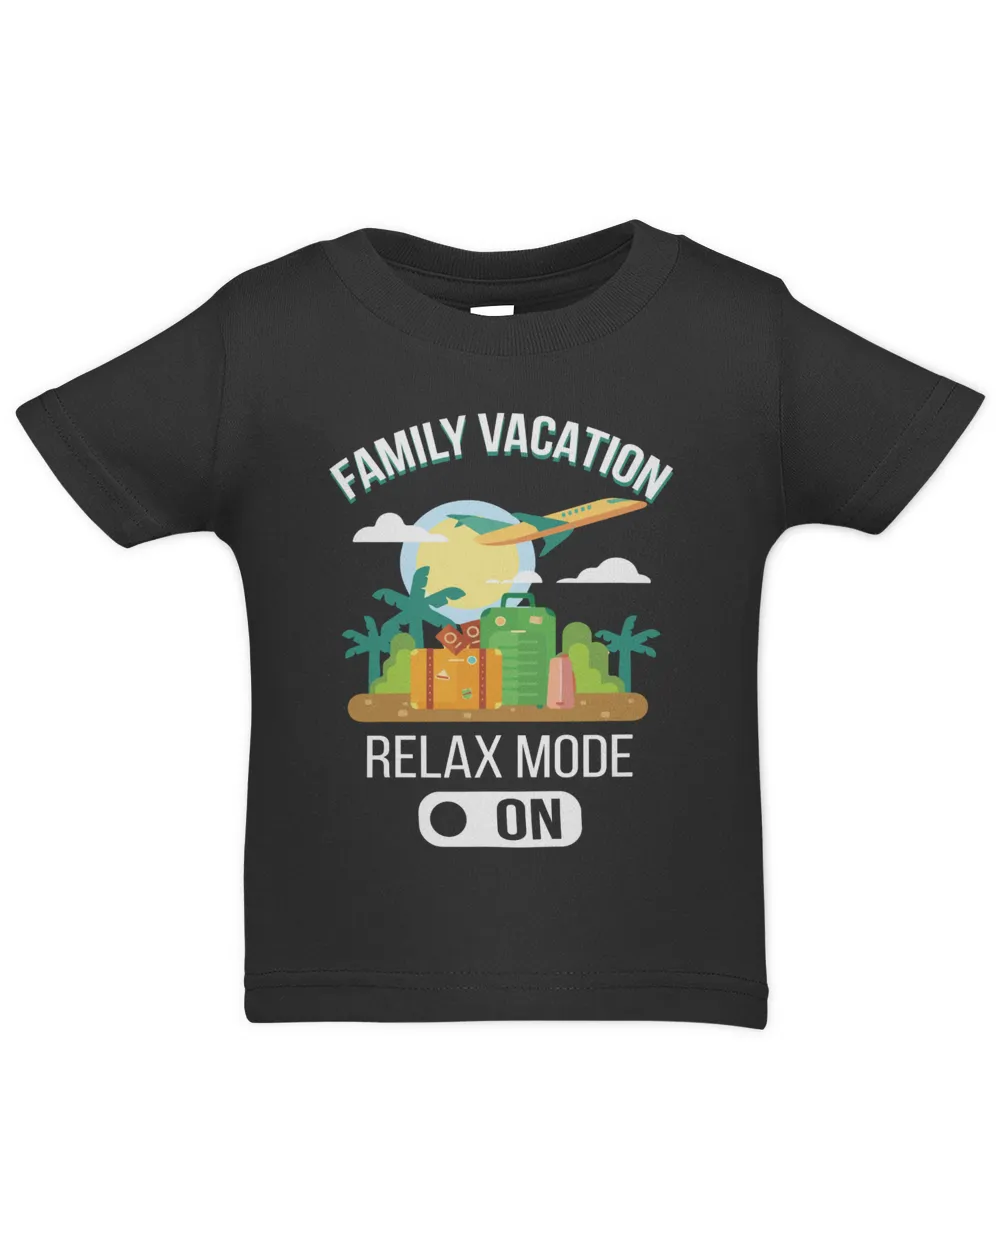 Family vacation relax mode on